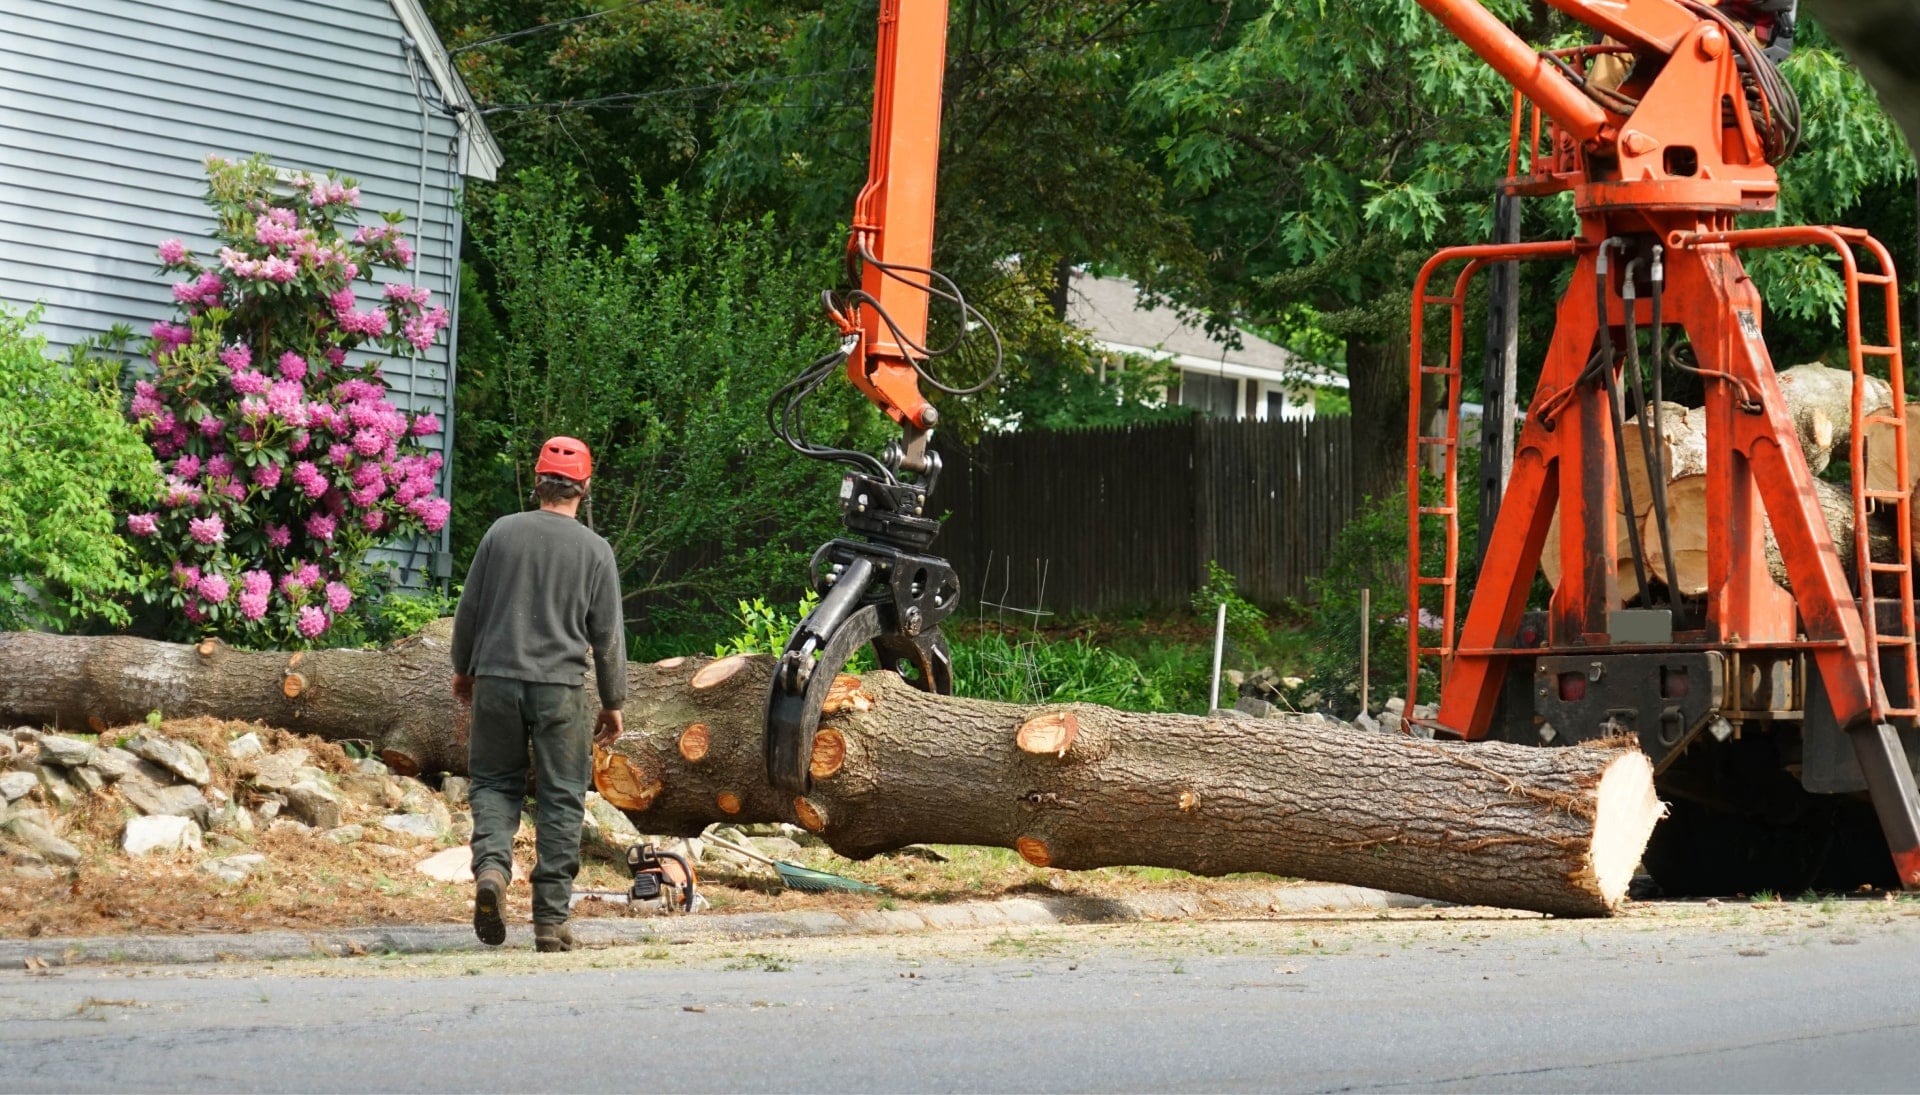 Local partner for Tree removal services in Greenville